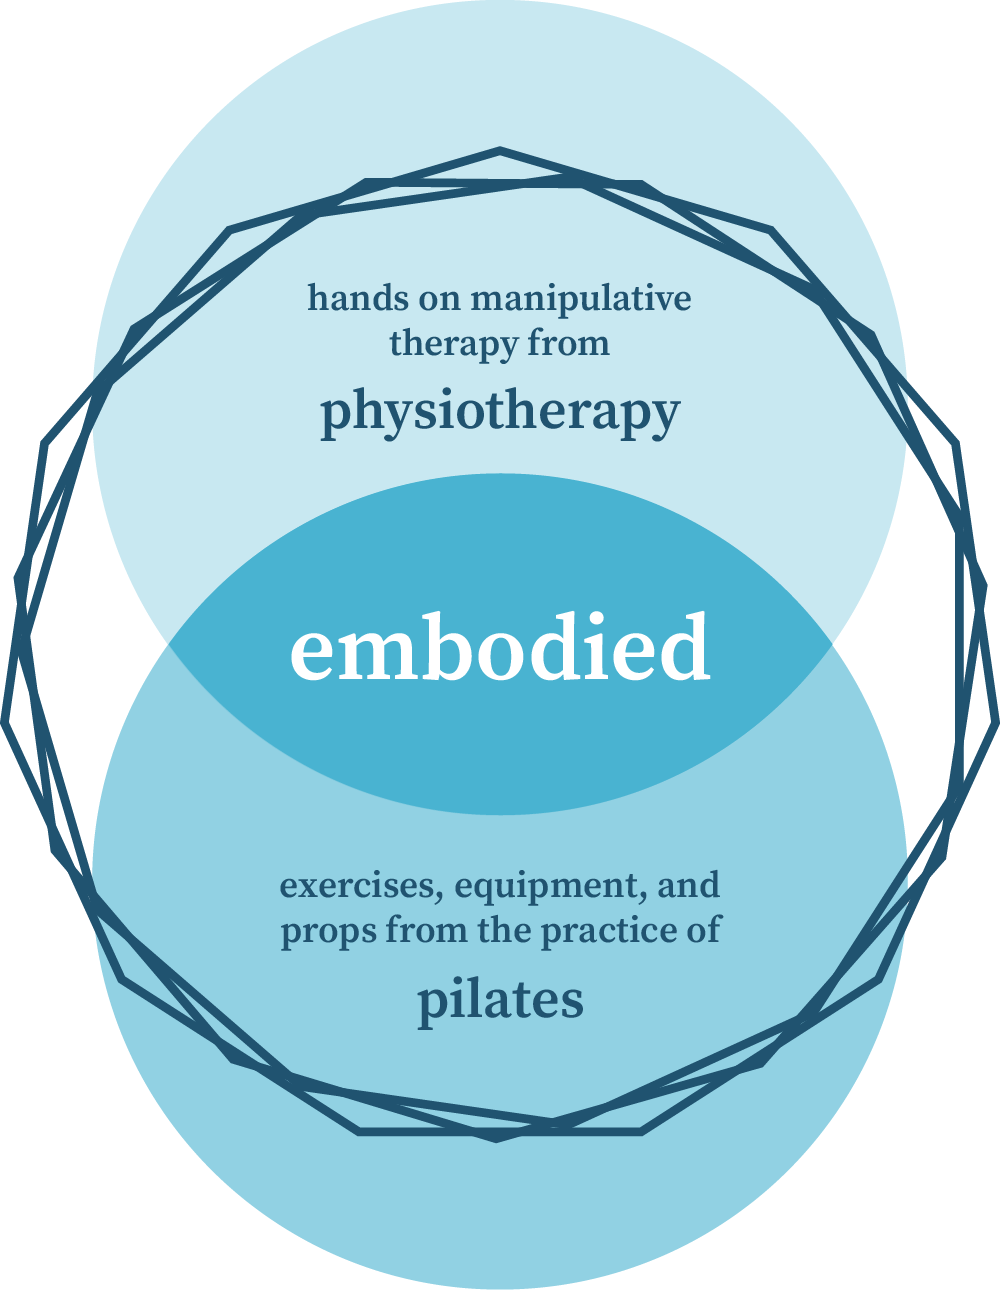 Two circles vertically stacked and overlapping like a venn diagram, top says “hands on manipulative therapy from physiotherapy”, bottom says “exercises, equipment, and props from the practice of pilates” and the word embodied is in the overlap to signify these things coming together